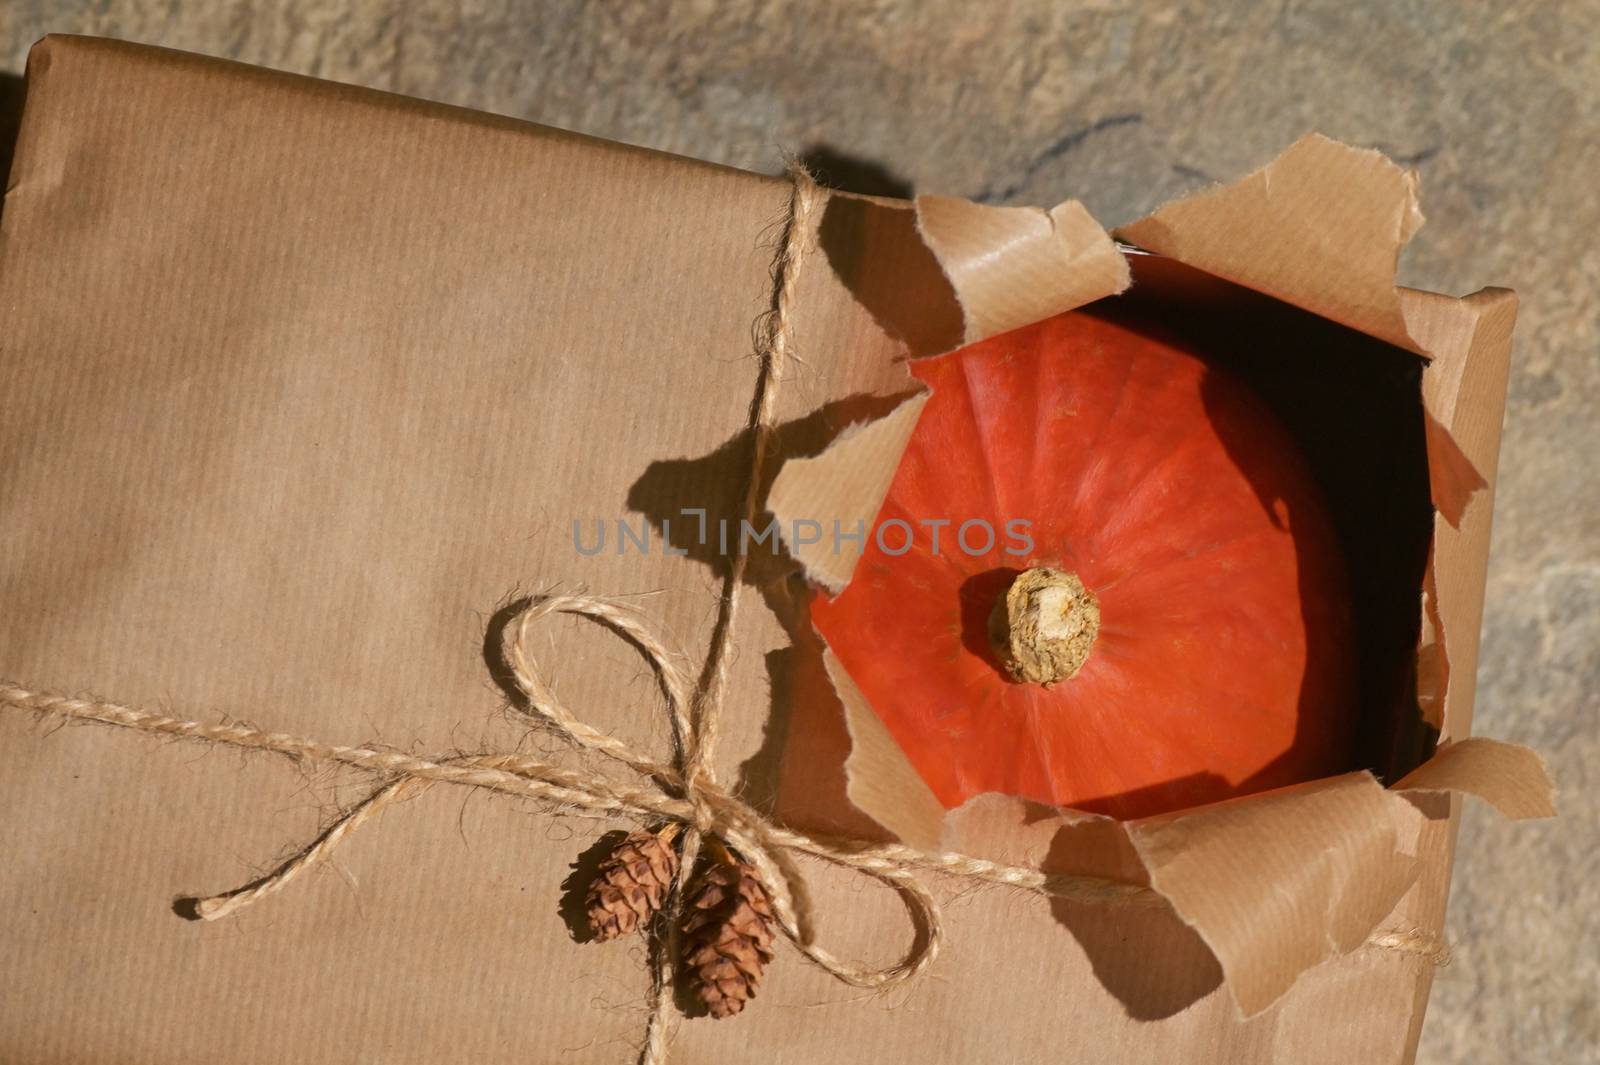 Abstract Autumn Pumpkin with Open Present Gift Box